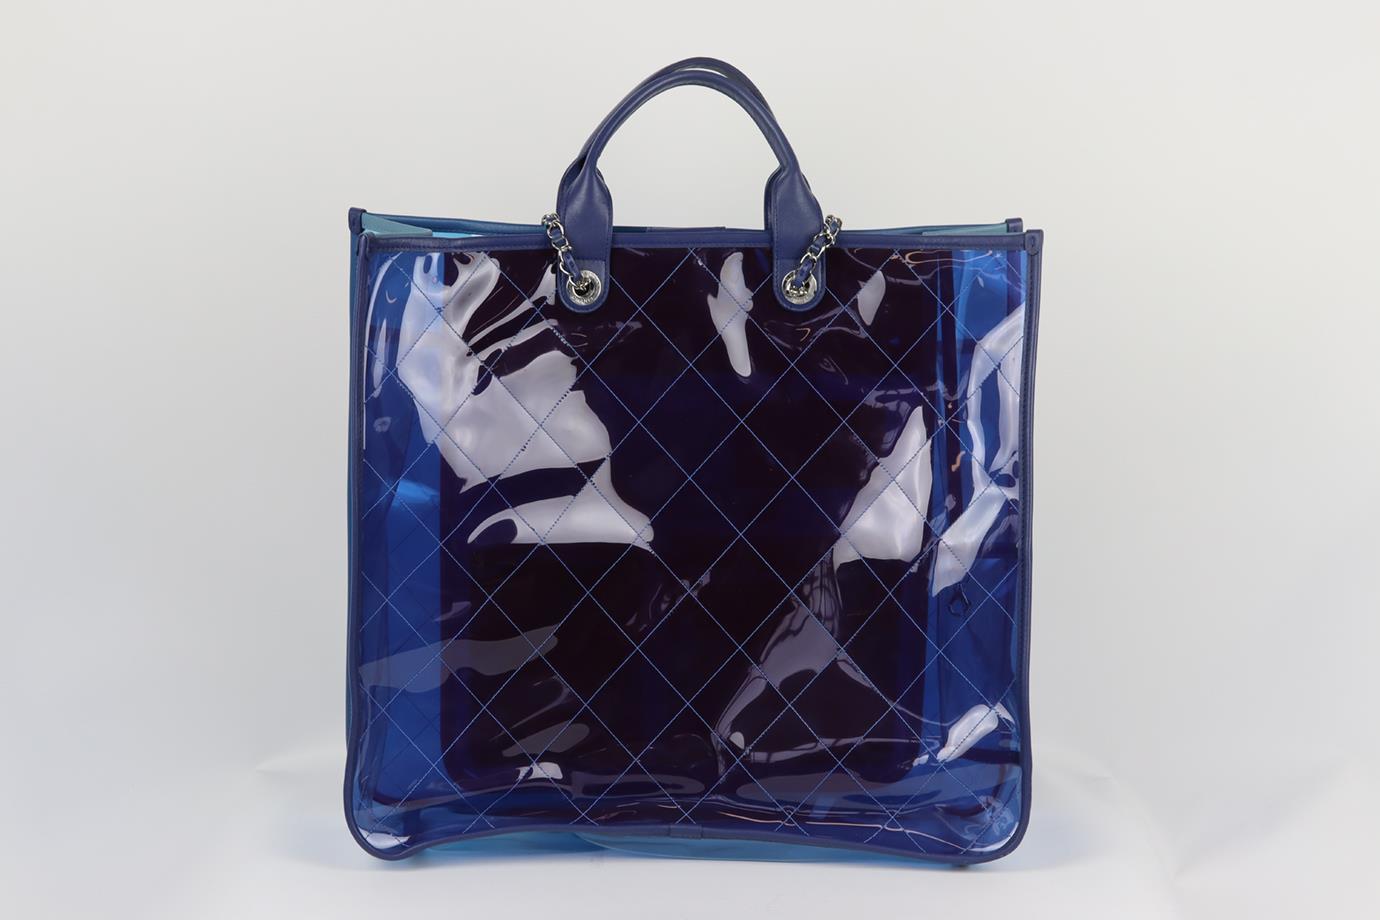 Chanel 2018 Coco Splash Quilted Perspex And Leather Tote Bag In Excellent Condition For Sale In London, GB